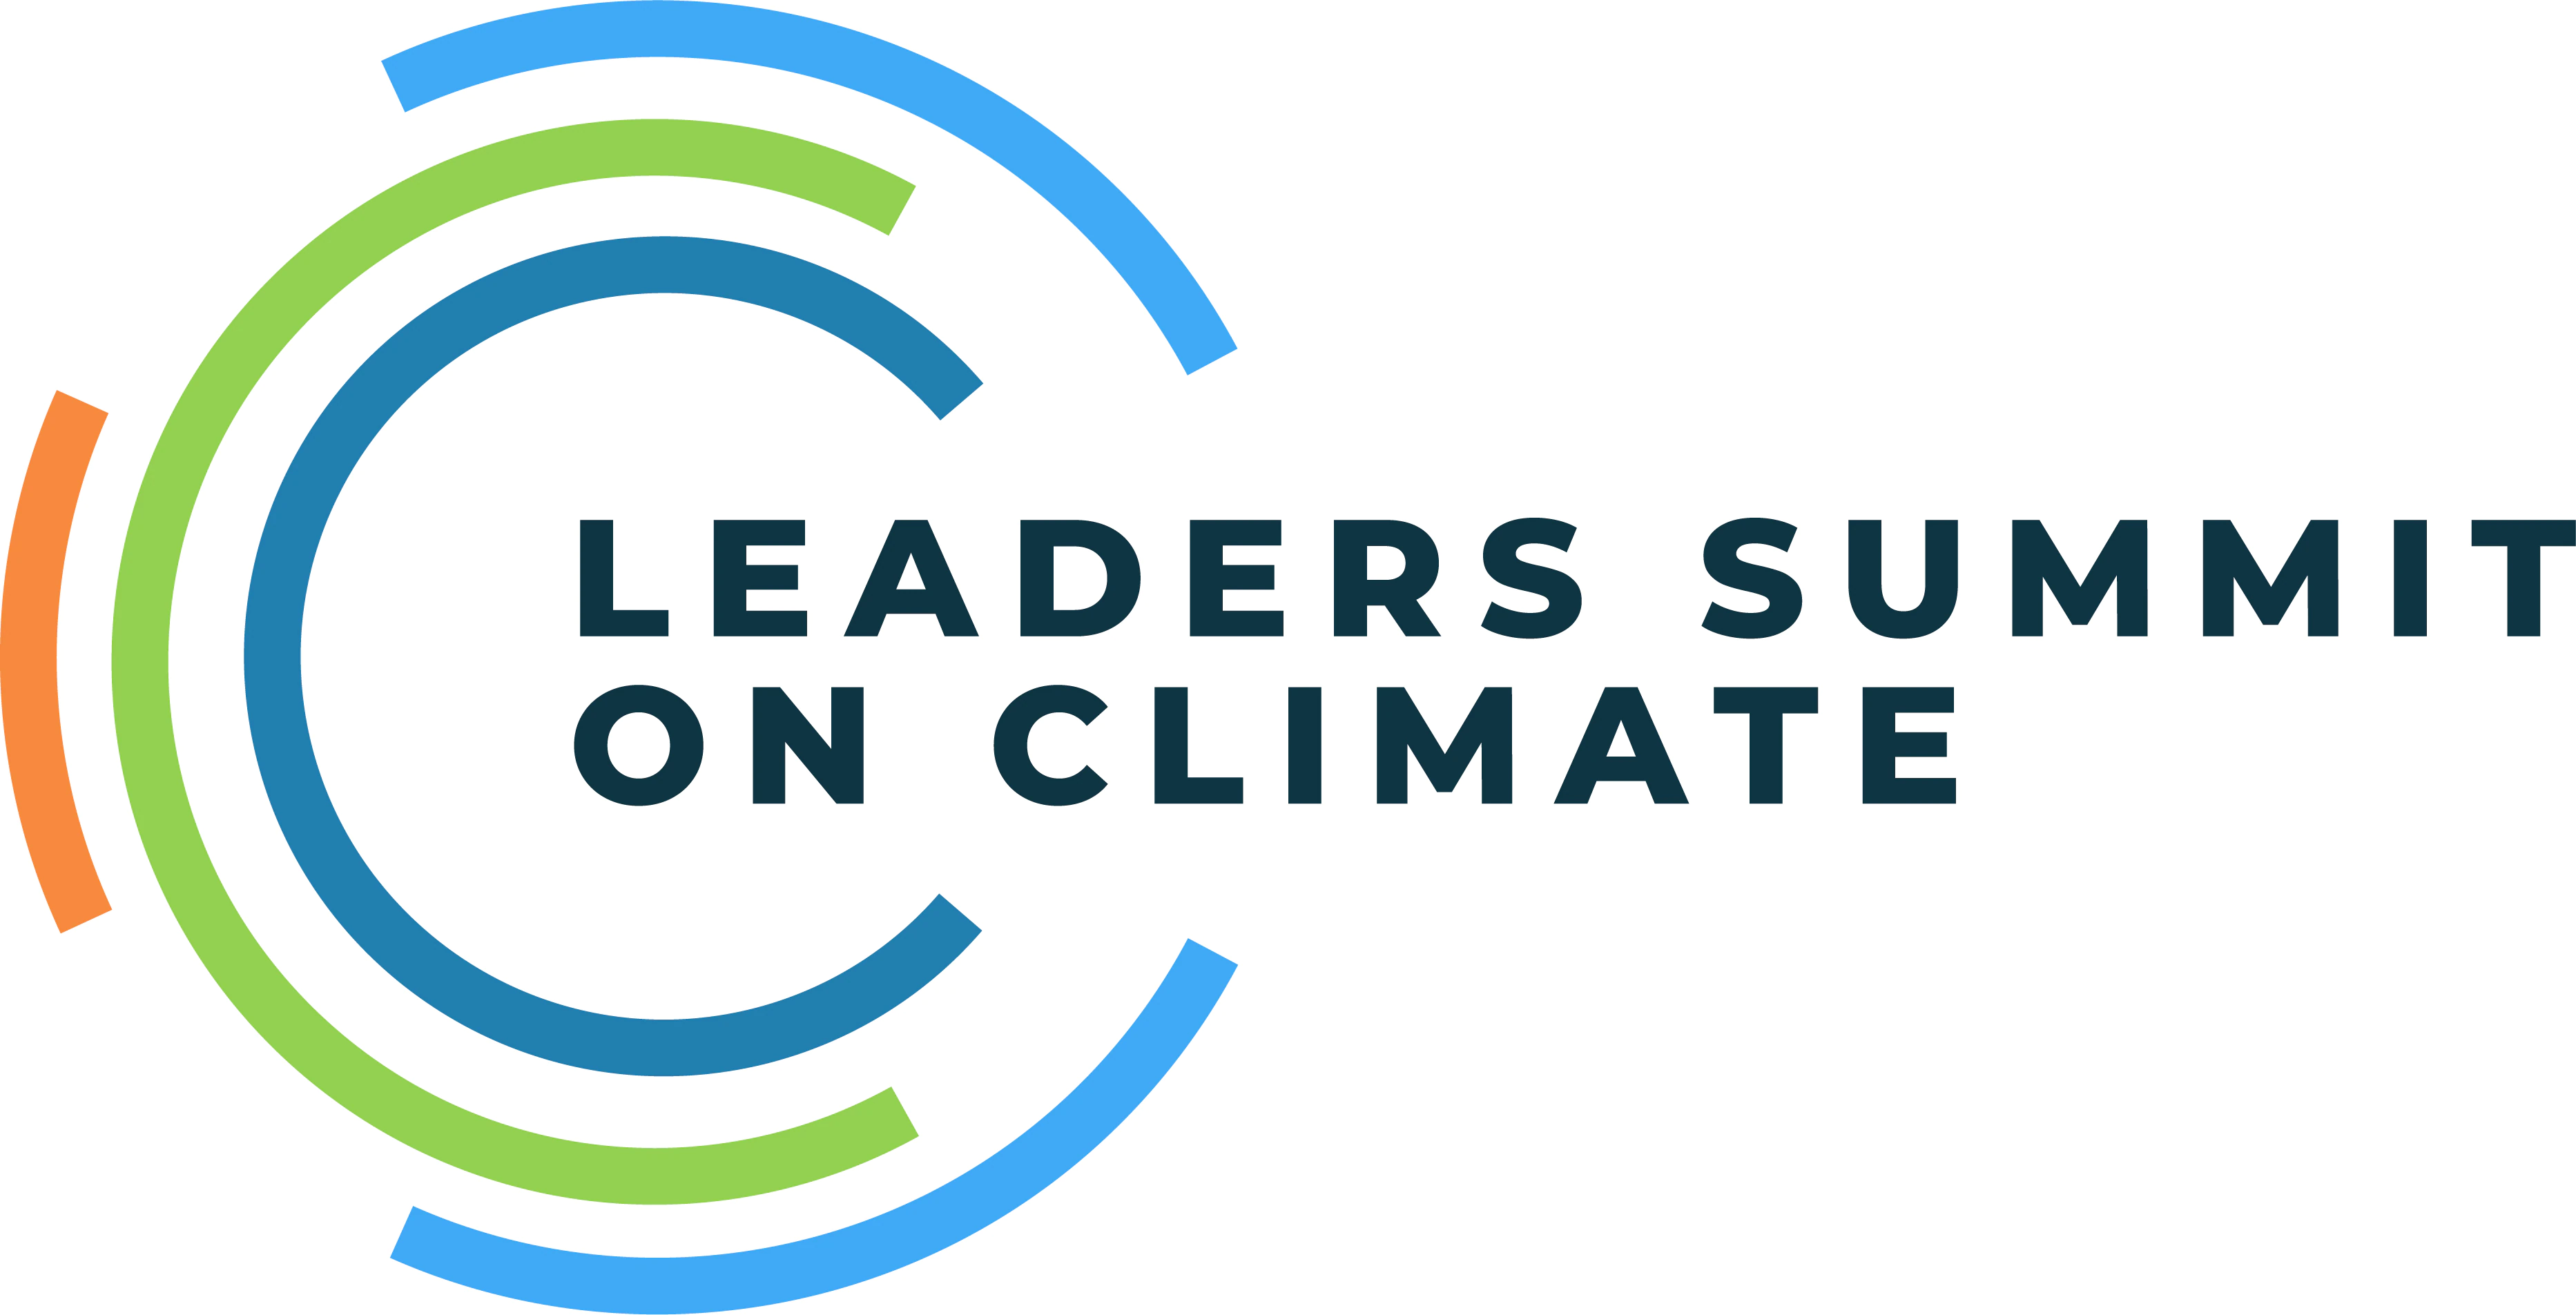 Leaders Summit on Climate - Day 1